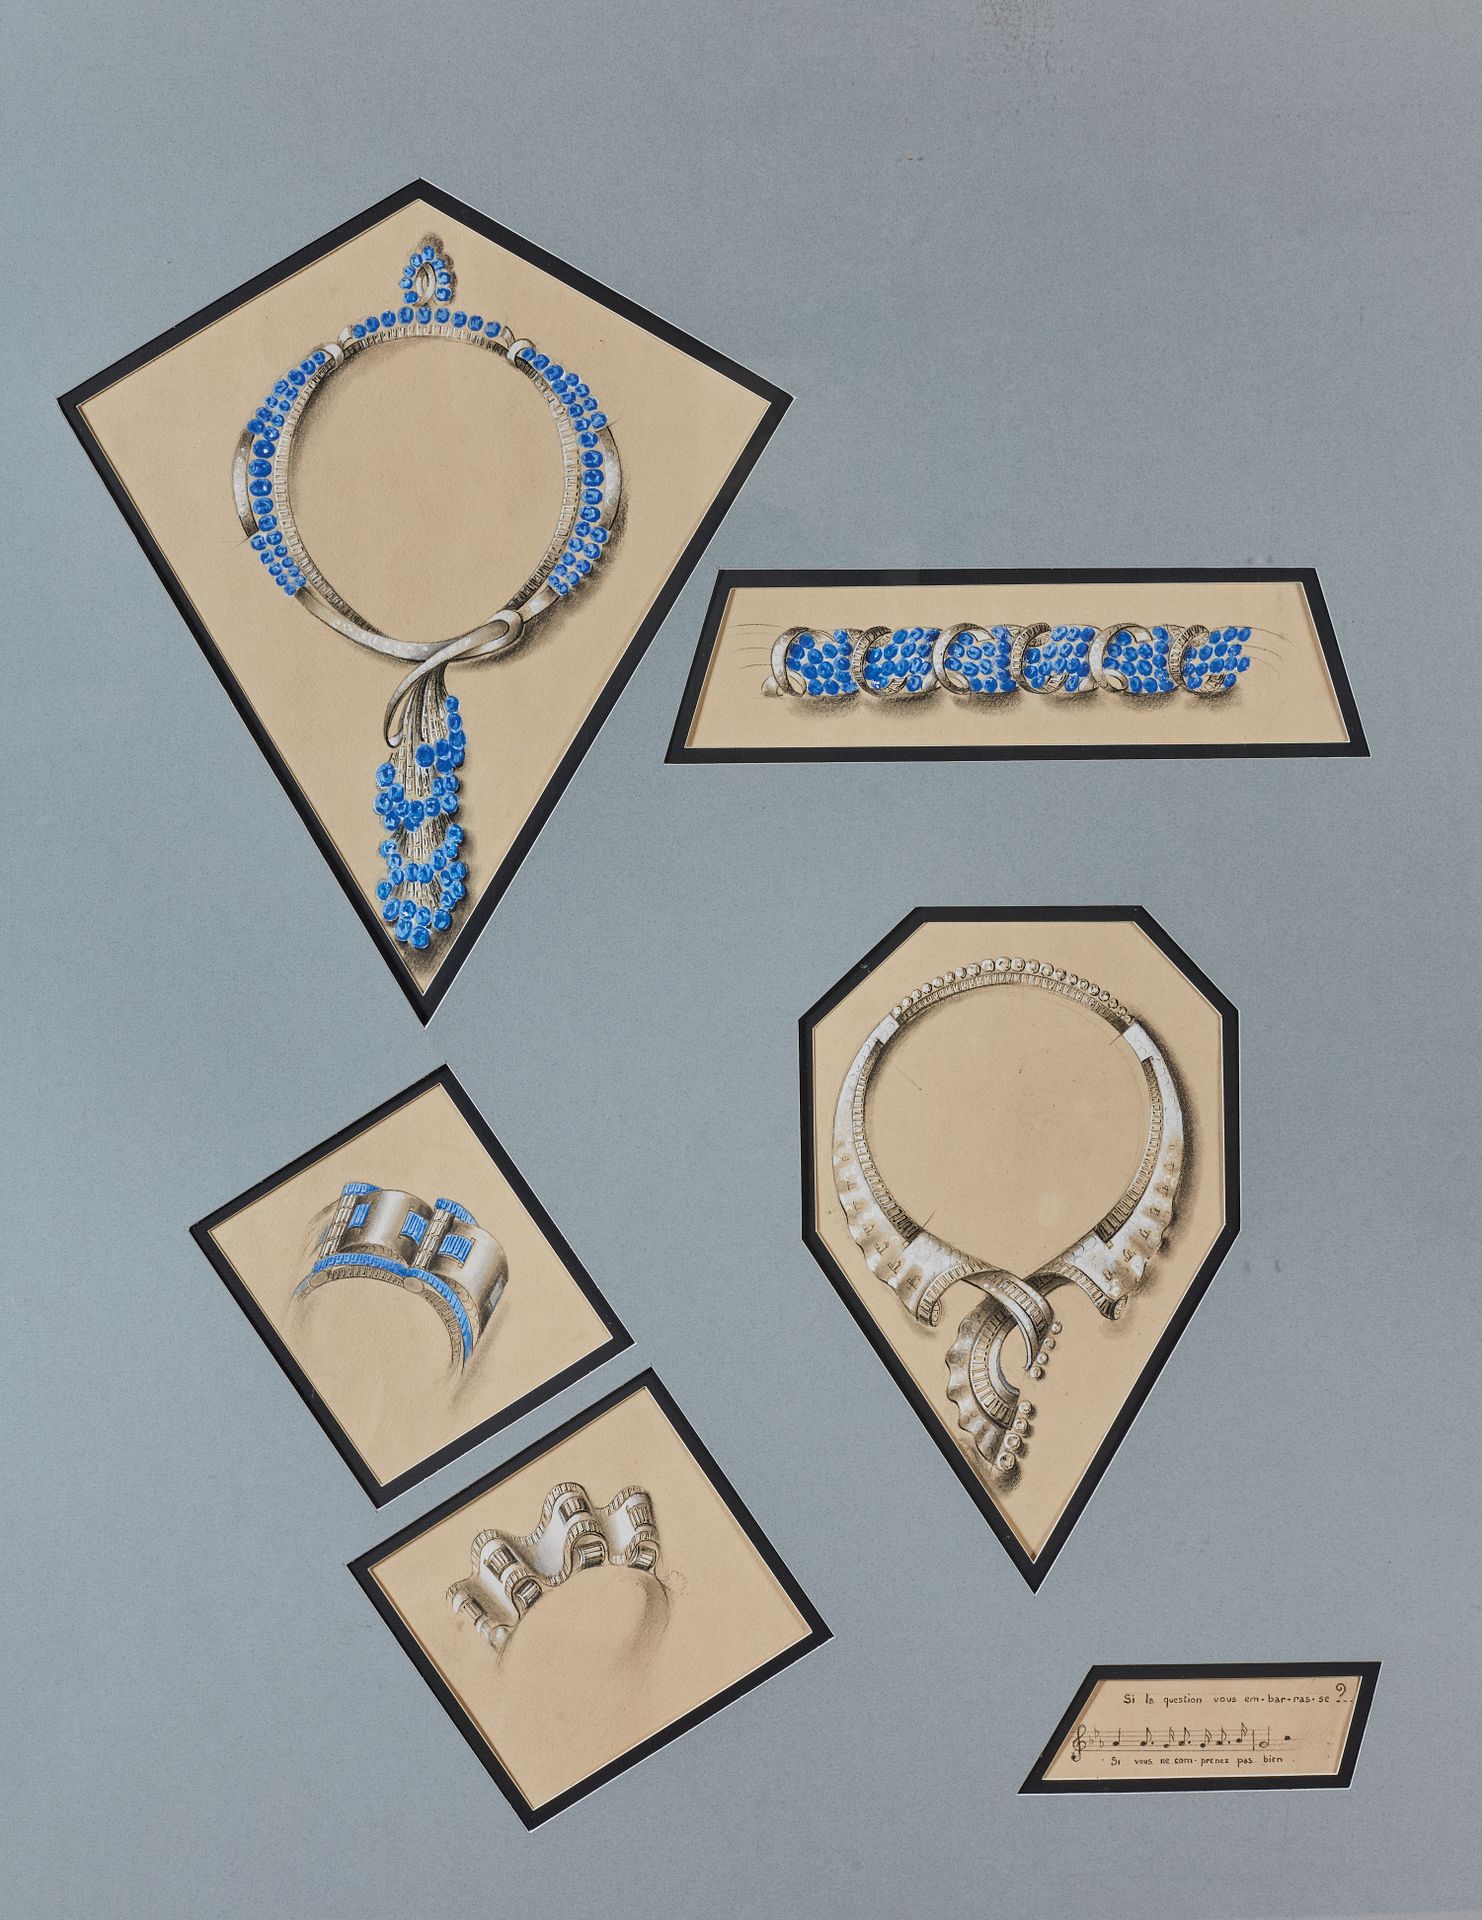 Null Attributed to René Sim LACAZE (1901-2000)

Ten jewelry projects and two sco&hellip;